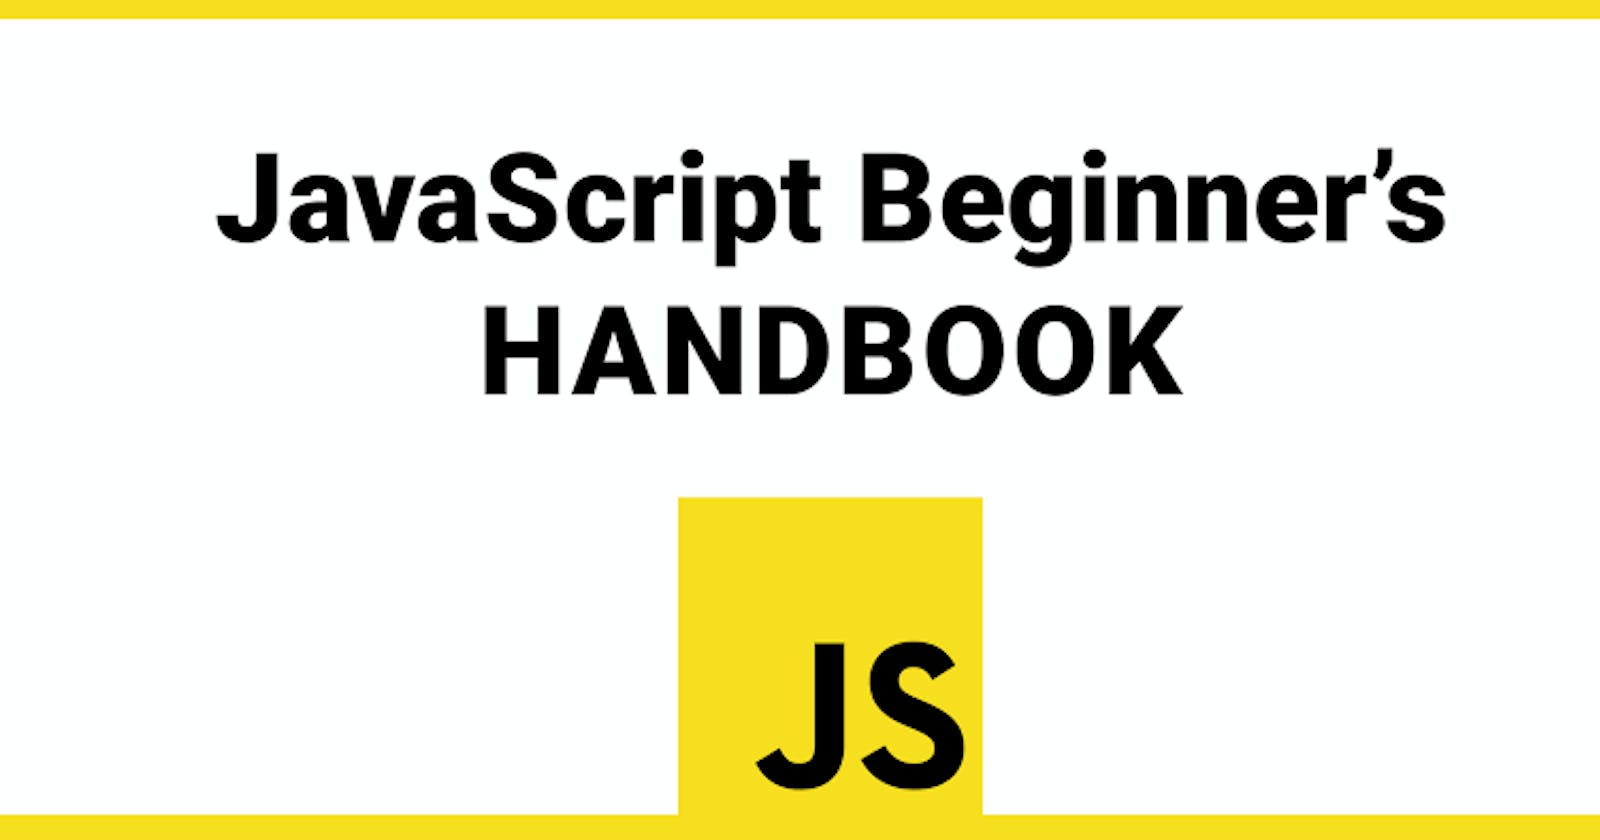 JavaScript Syntax Made Easy: A Practical Handbook for Web Developers